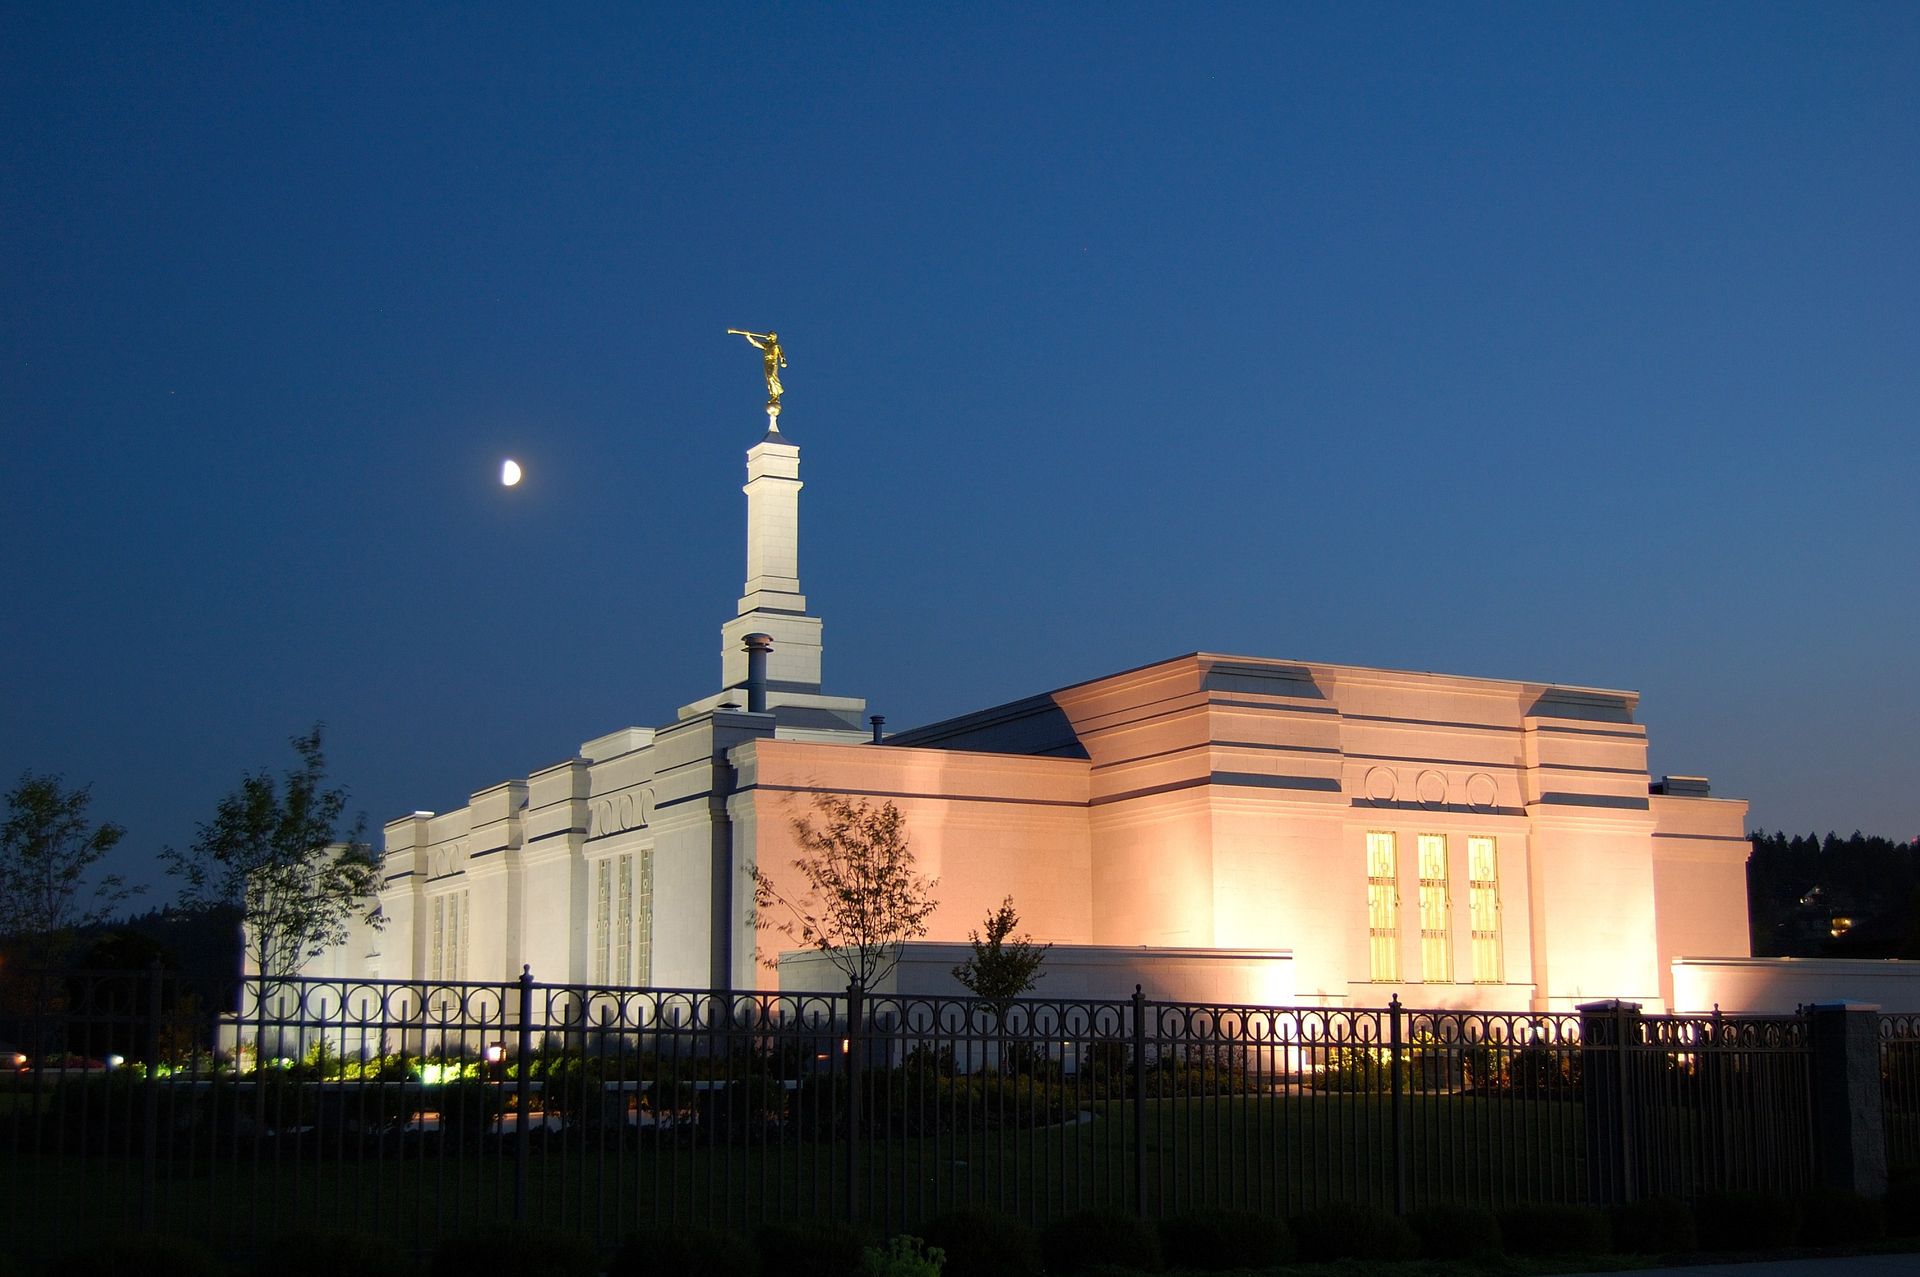 The Spokane Washington Temple in the evening, including scenery.